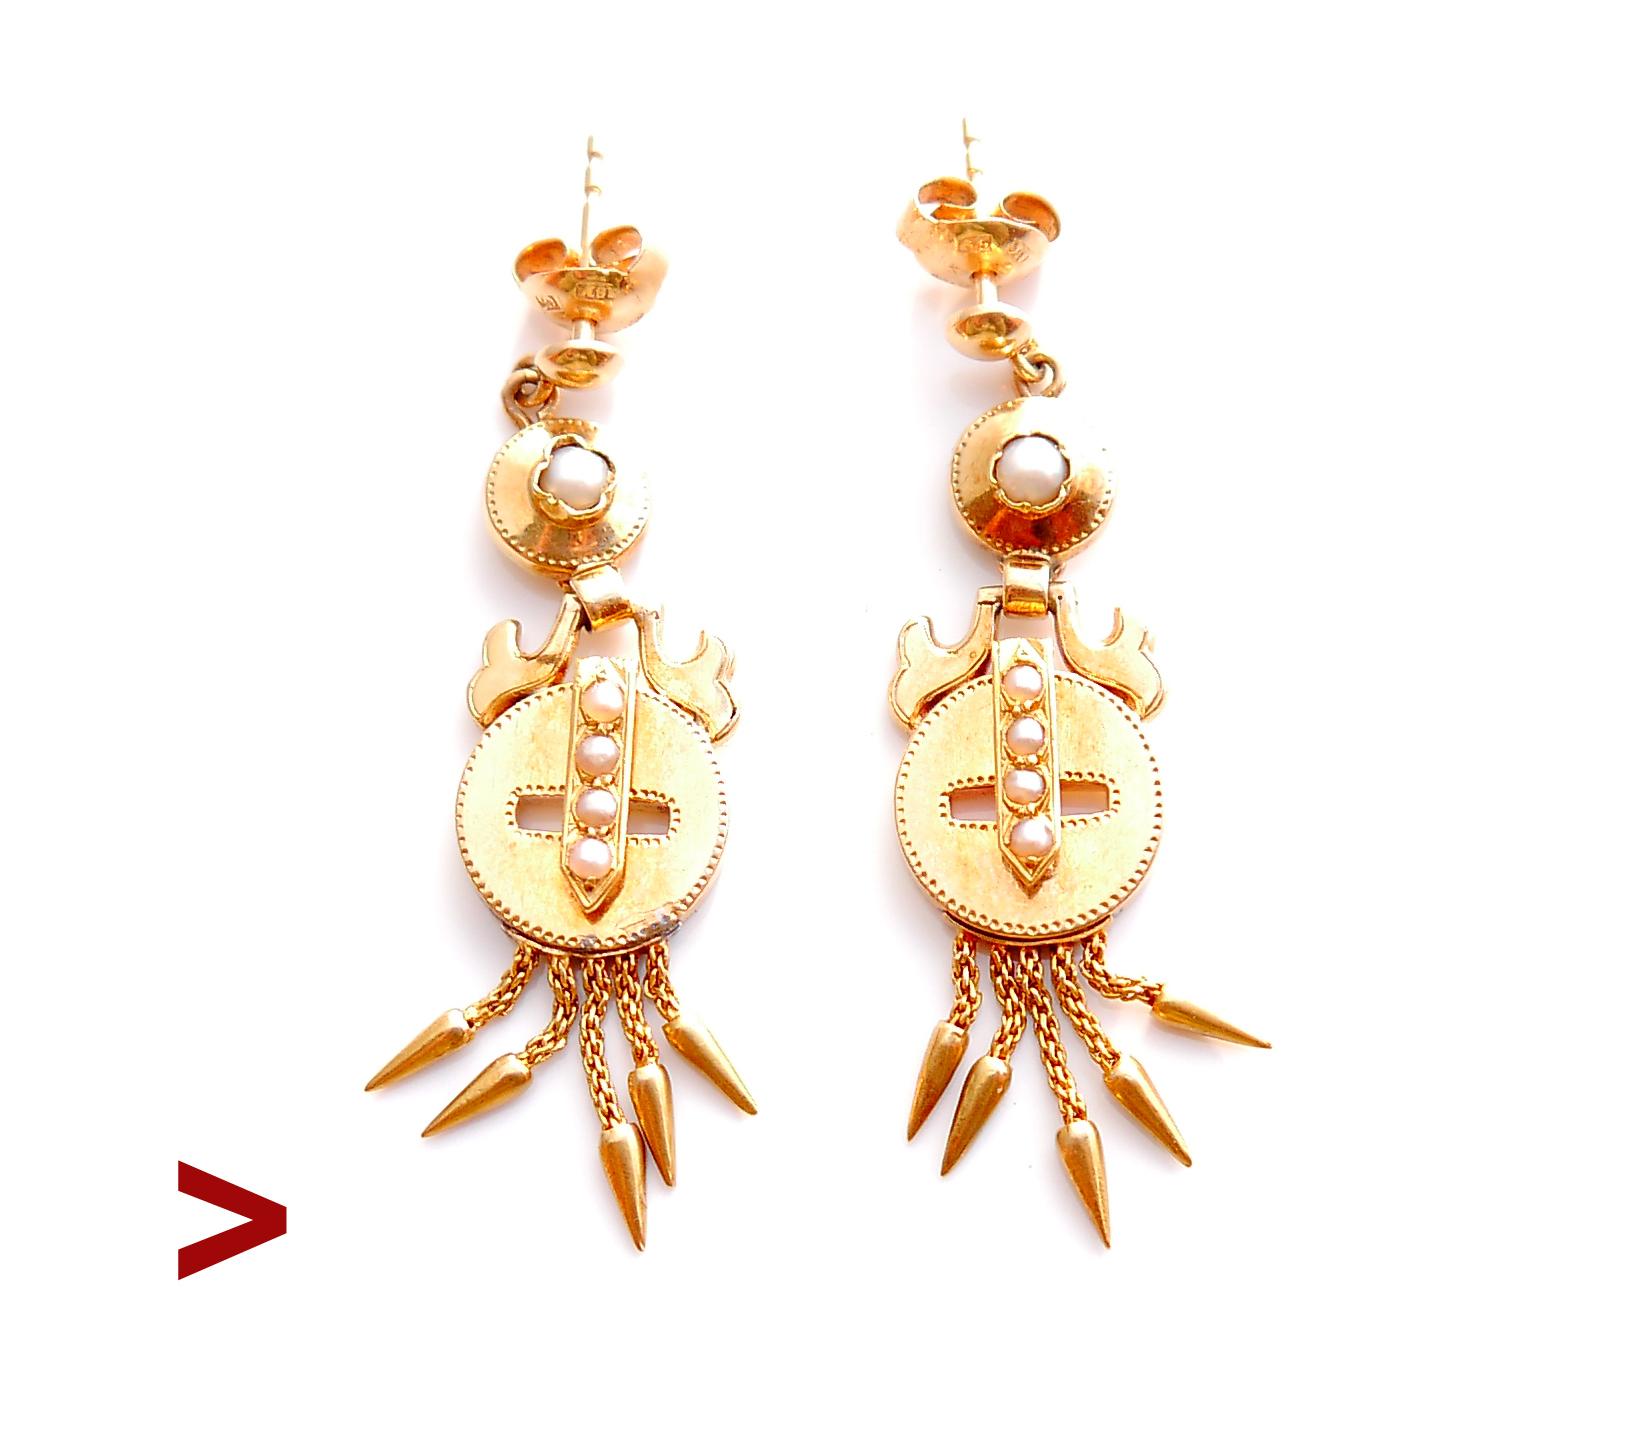 A pair of old 18K Gold earrings decorated with natural river /seed Pearls.

Freely suspended and moving drop-shaped dangles on woven chains, dot - planished decor on the borders.

Each earring is 47 mm long suspended. Each round part with 4 pearls Ø